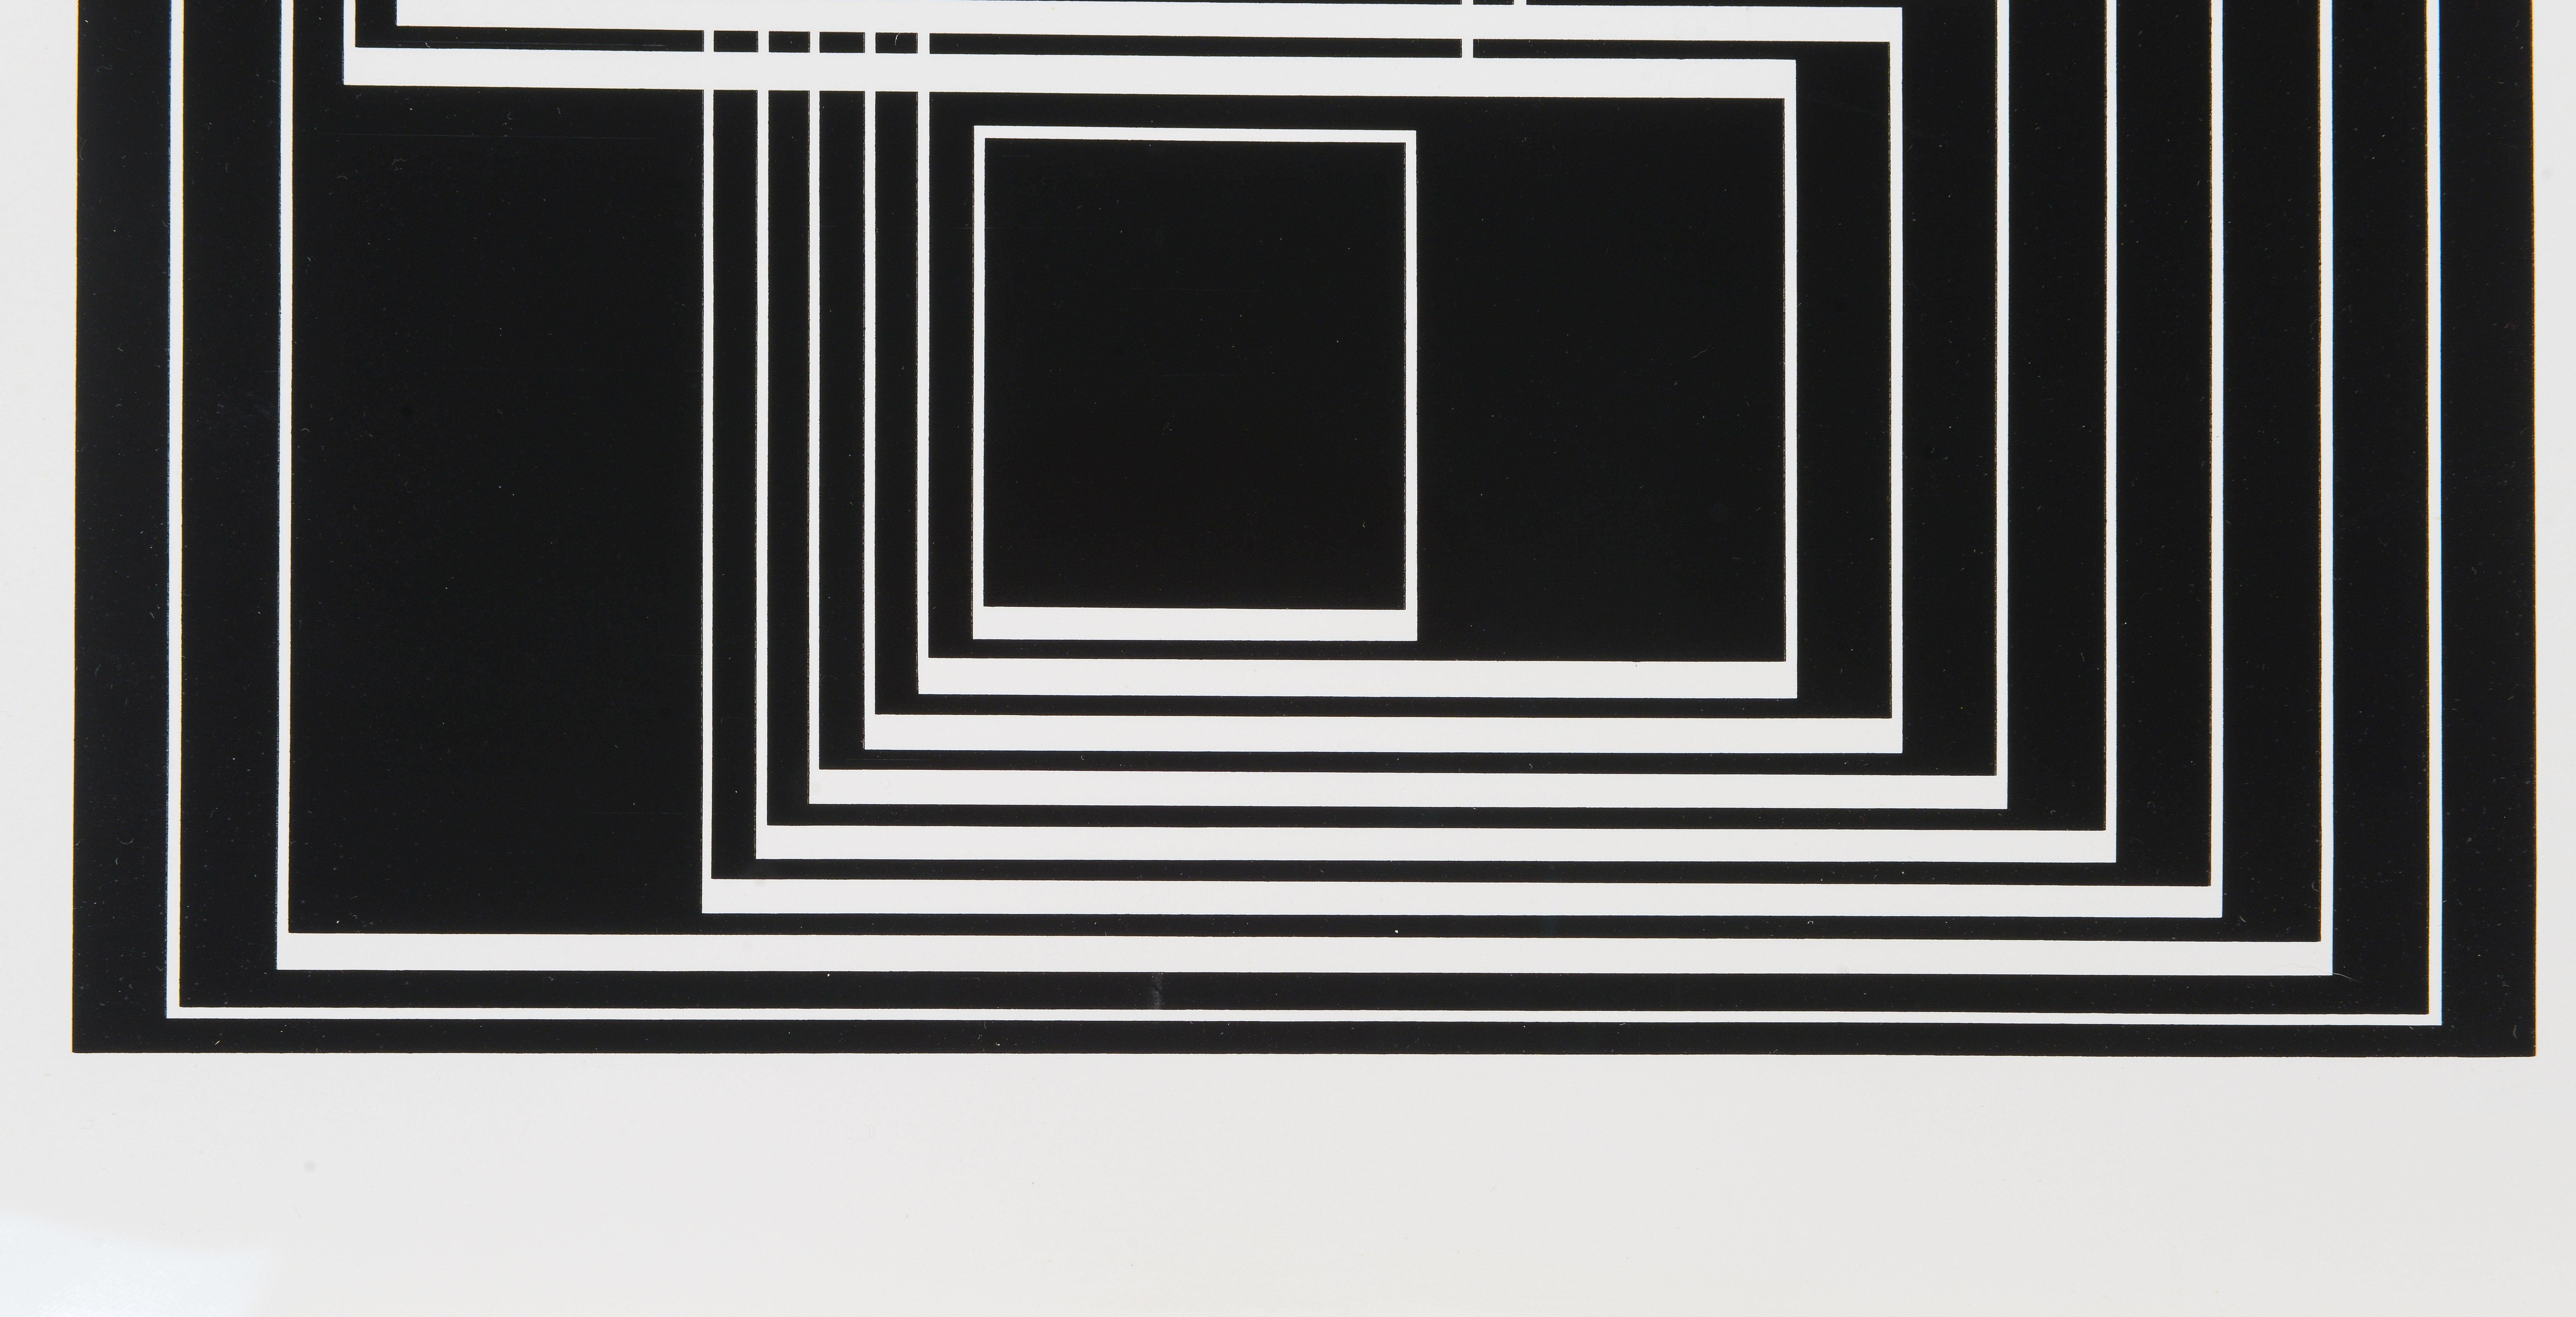 Josef Albers (German-American, b. 1888) 
Created for the limited edition 'Washburn College Bible' in 1979 as the frontispiece for Volume II. Framed in a clean-lined white lacquer frame, it showcases bold white geometric outlines against a black